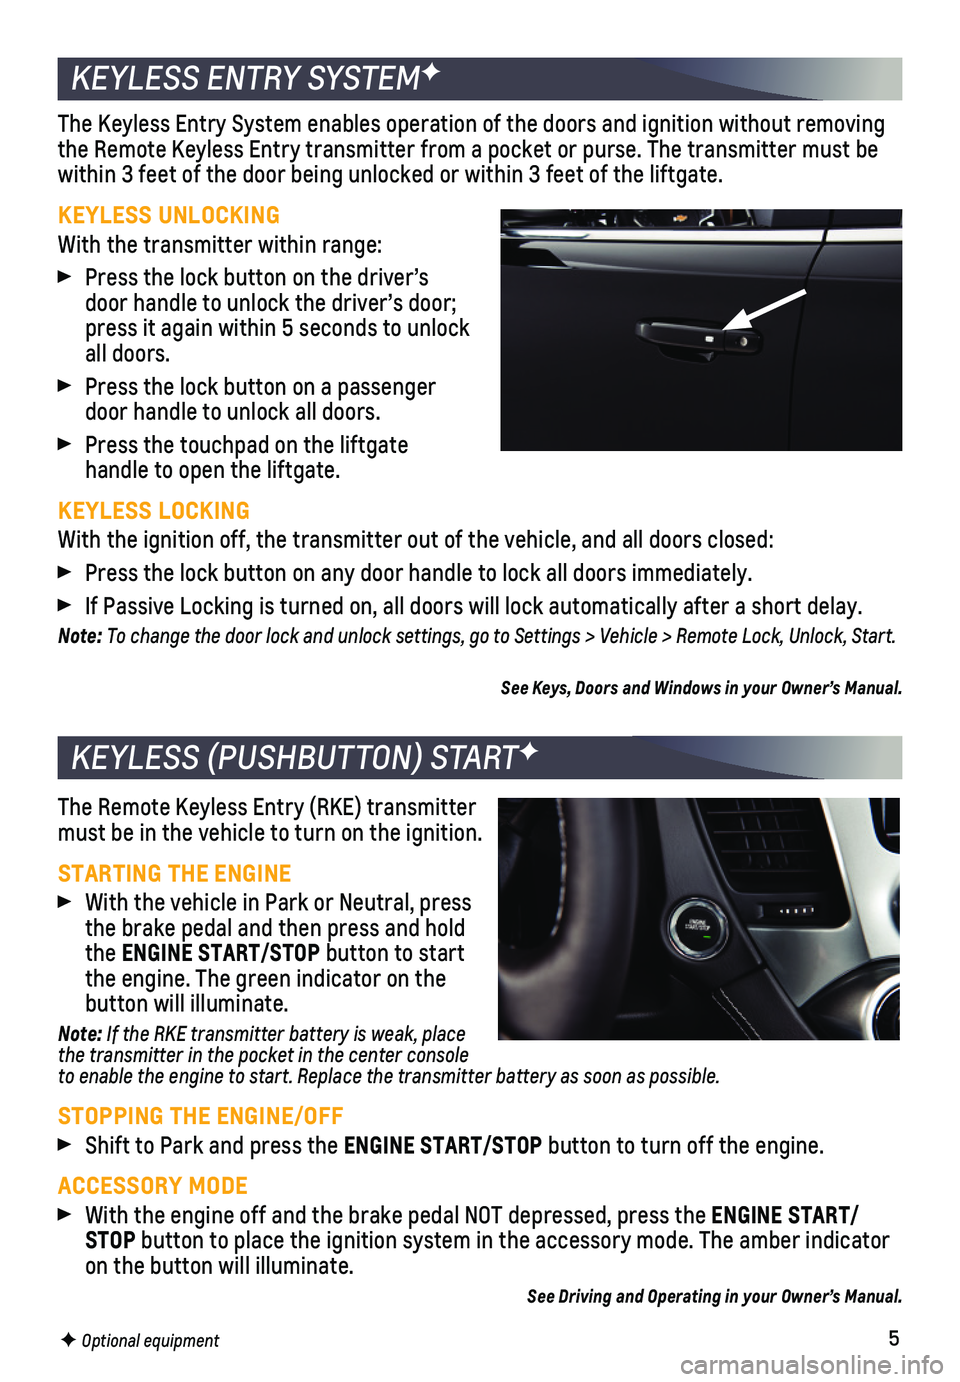 CHEVROLET TAHOE 2019  Get To Know Guide 5
The Remote Keyless Entry (RKE) transmitter must be in the vehicle to turn on the ignition.
STARTING THE ENGINE  
 With the vehicle in Park or Neutral, press the brake pedal and then press and hold t